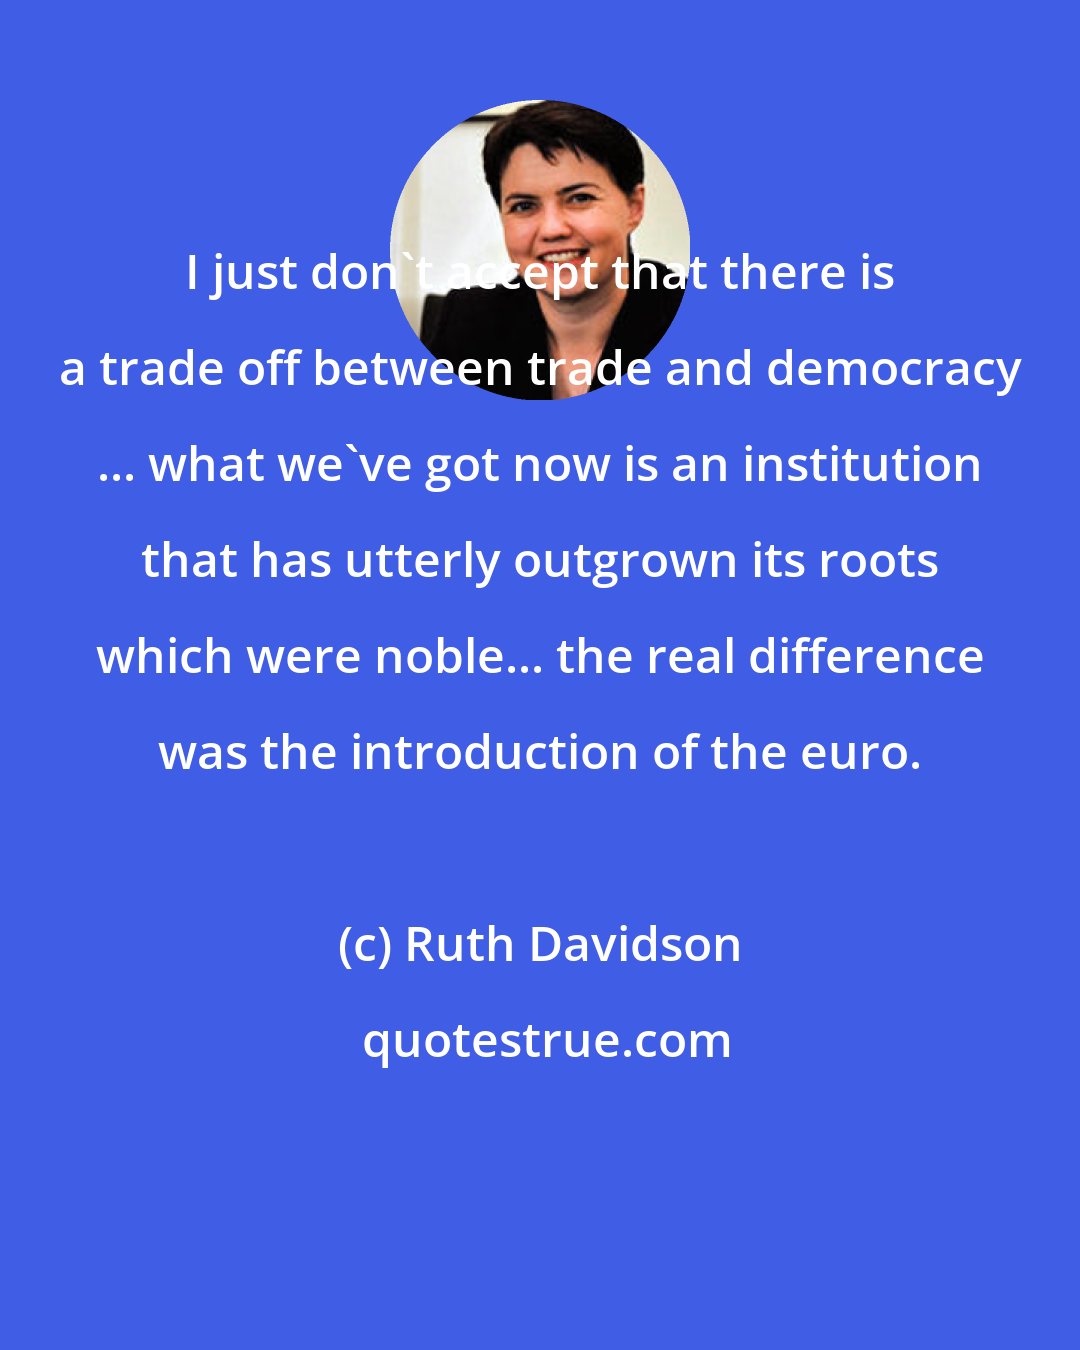 Ruth Davidson: I just don't accept that there is a trade off between trade and democracy ... what we've got now is an institution that has utterly outgrown its roots which were noble... the real difference was the introduction of the euro.